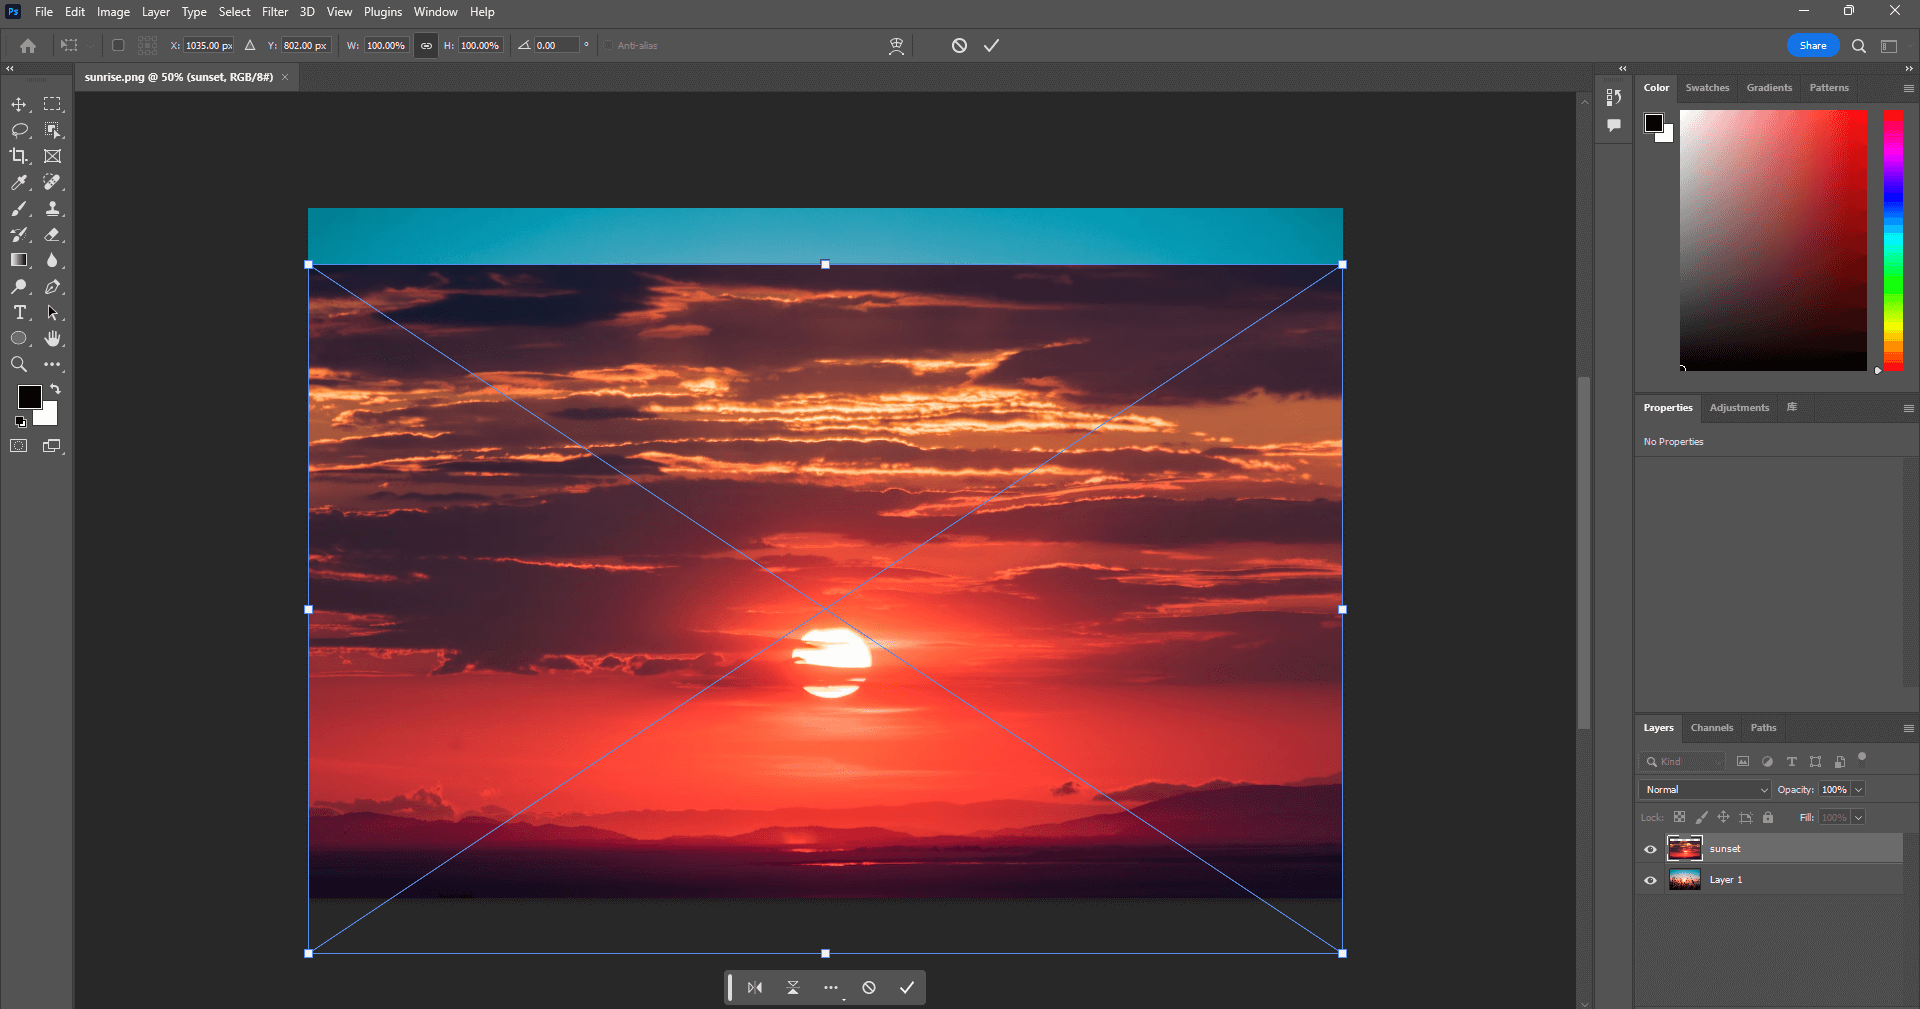 add an image in photoshop by dragging and drooping